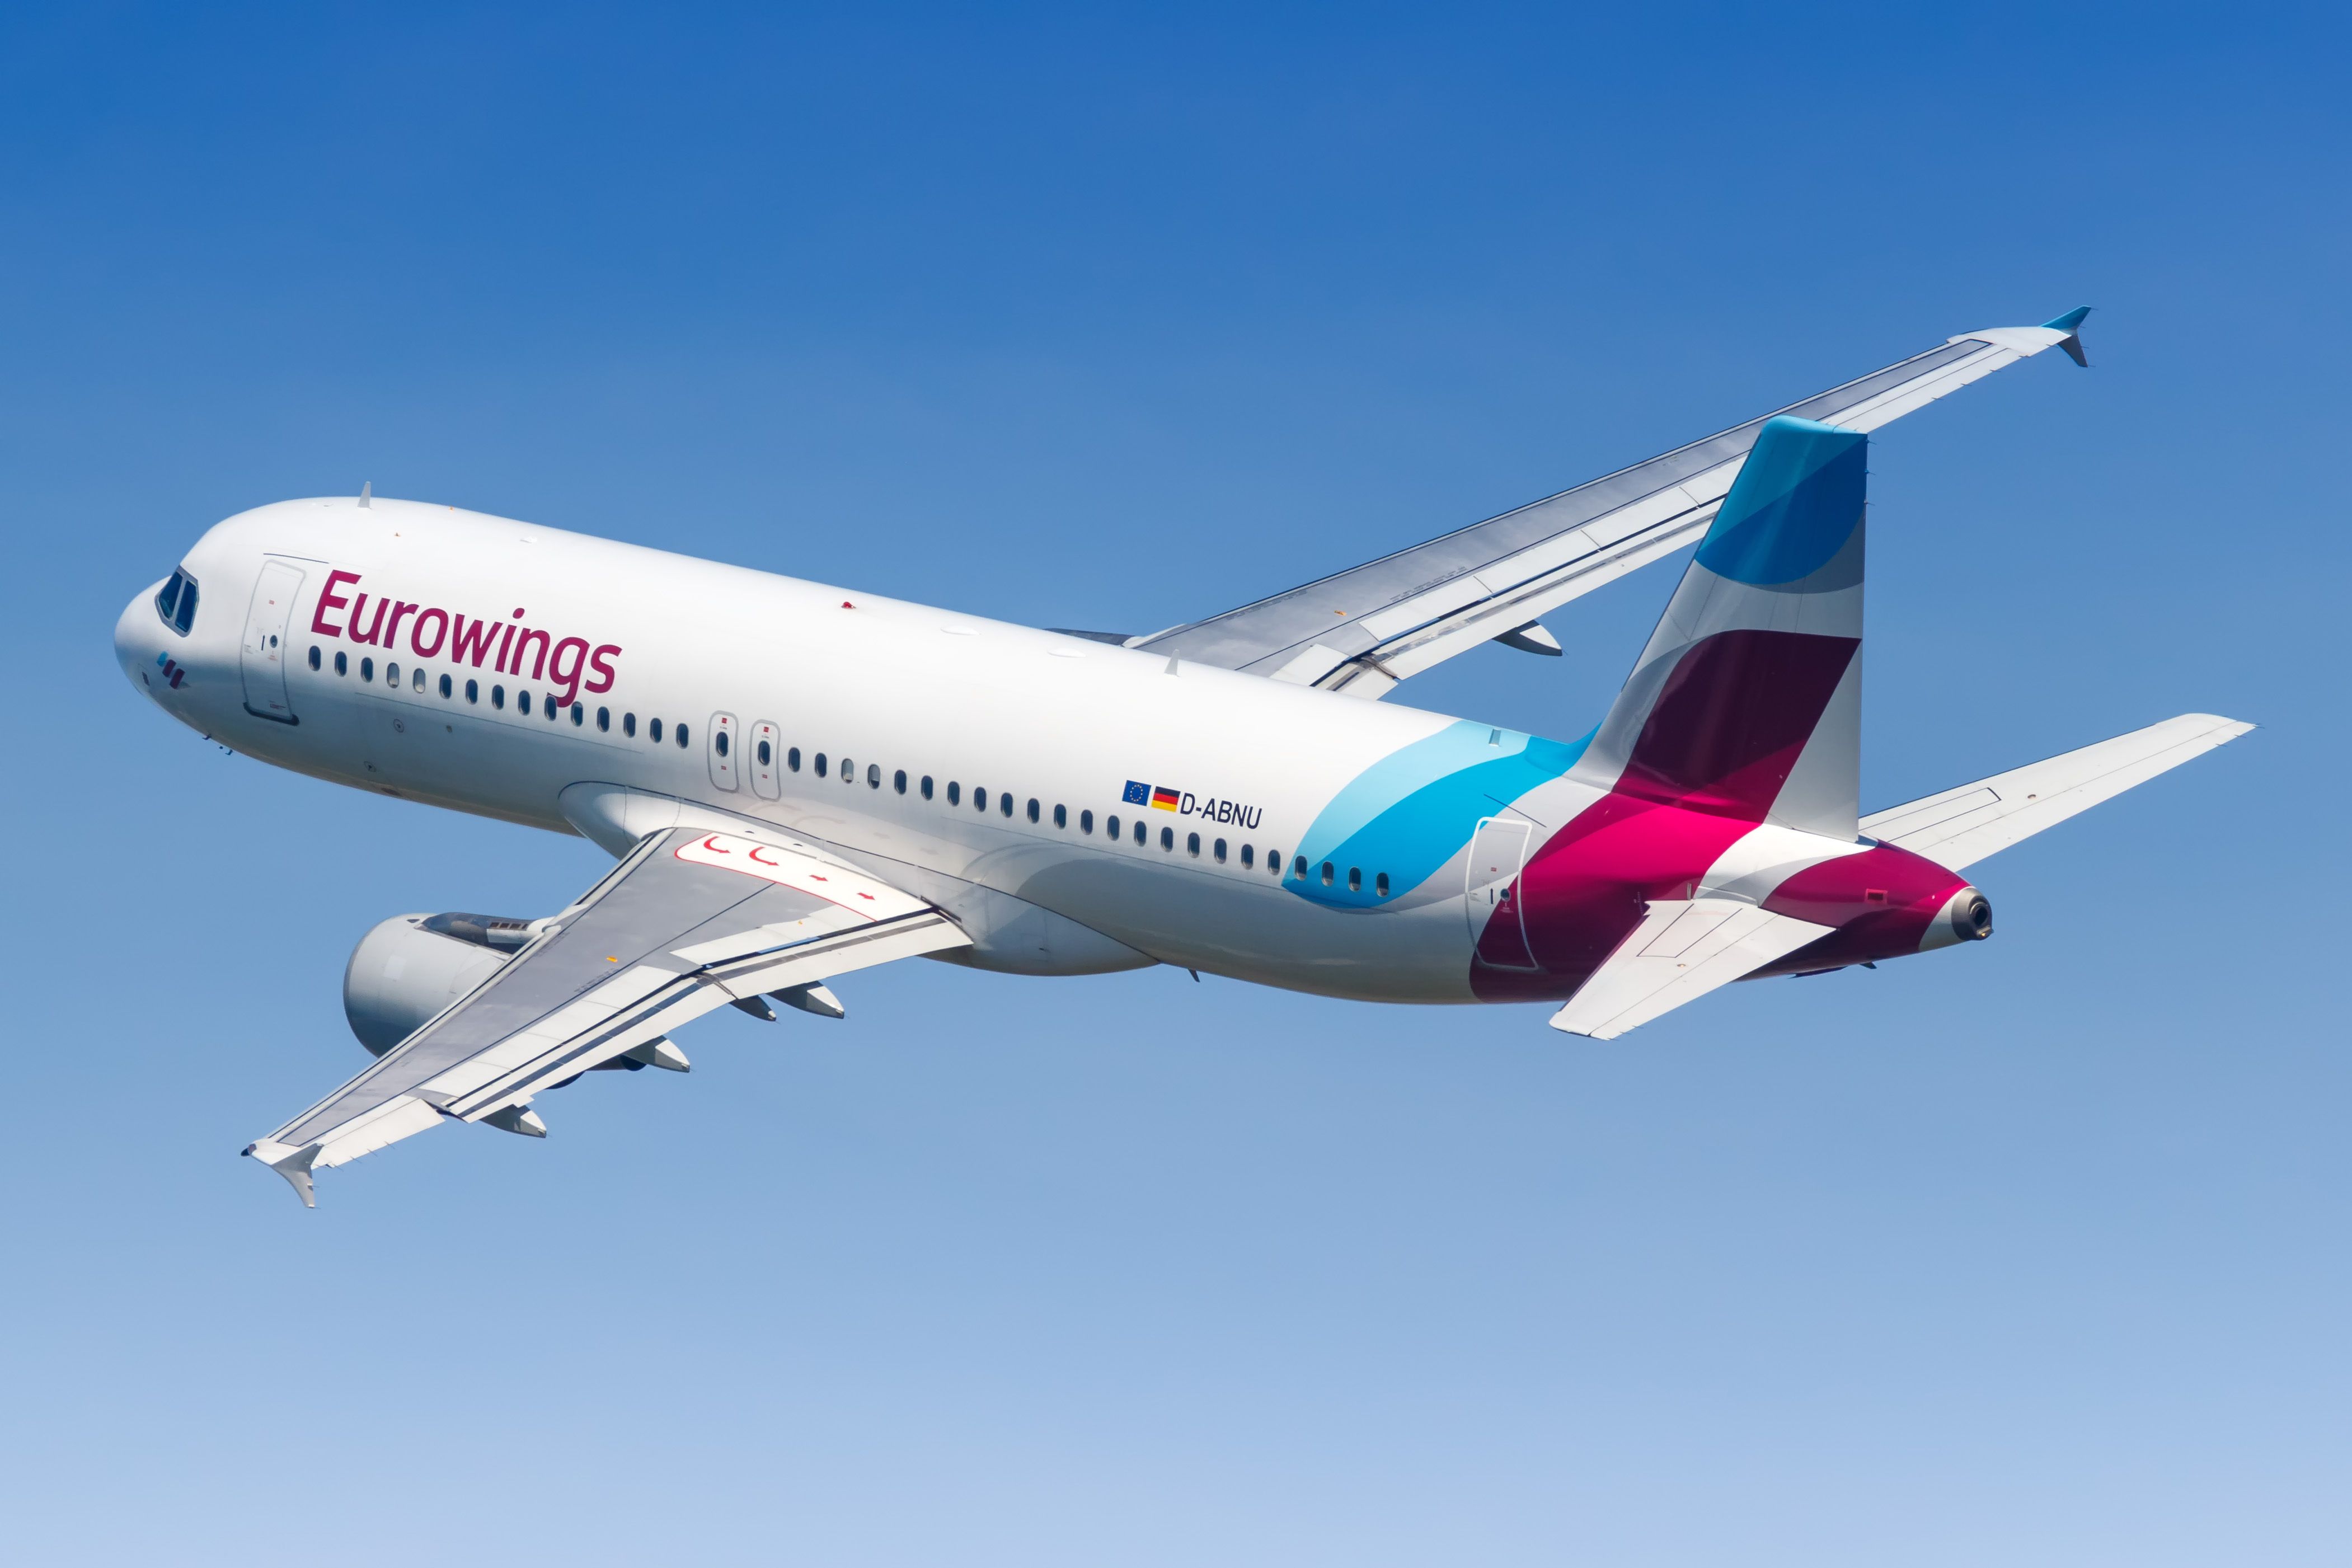 A Eurowings Airbus A320 flying in the sky.